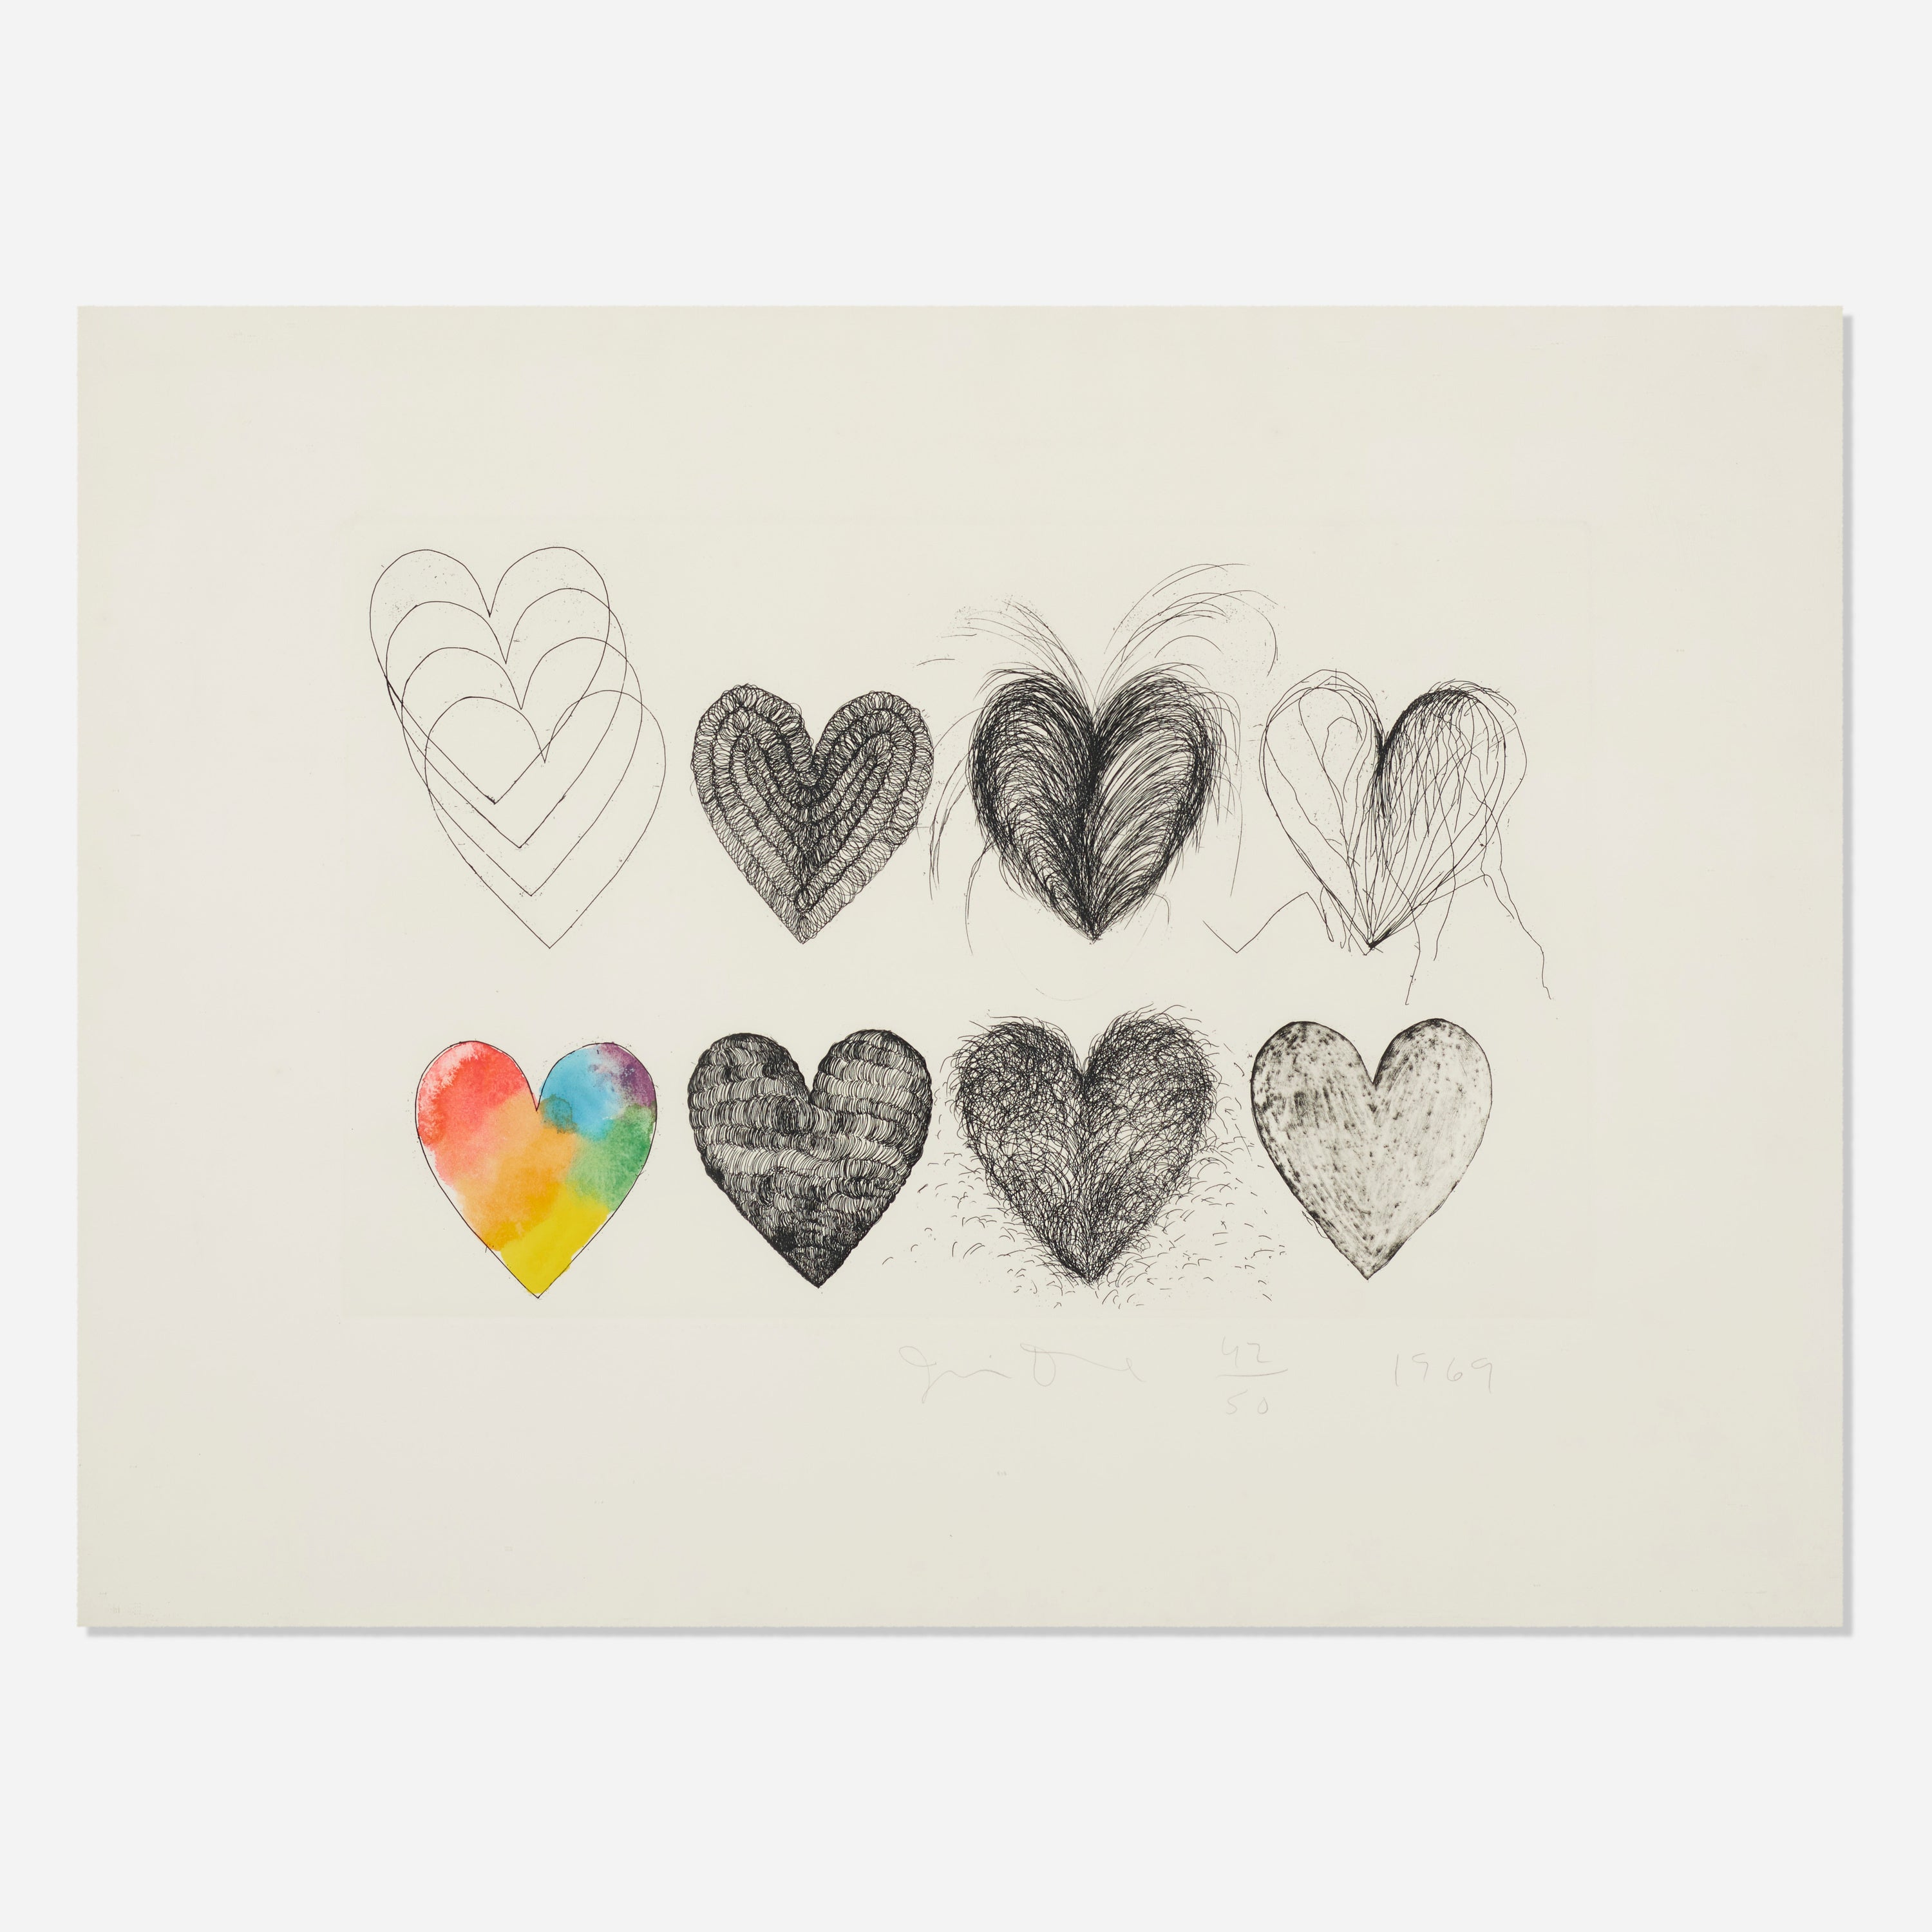 Jim Dine, Hearts and a Watercolor, 1969